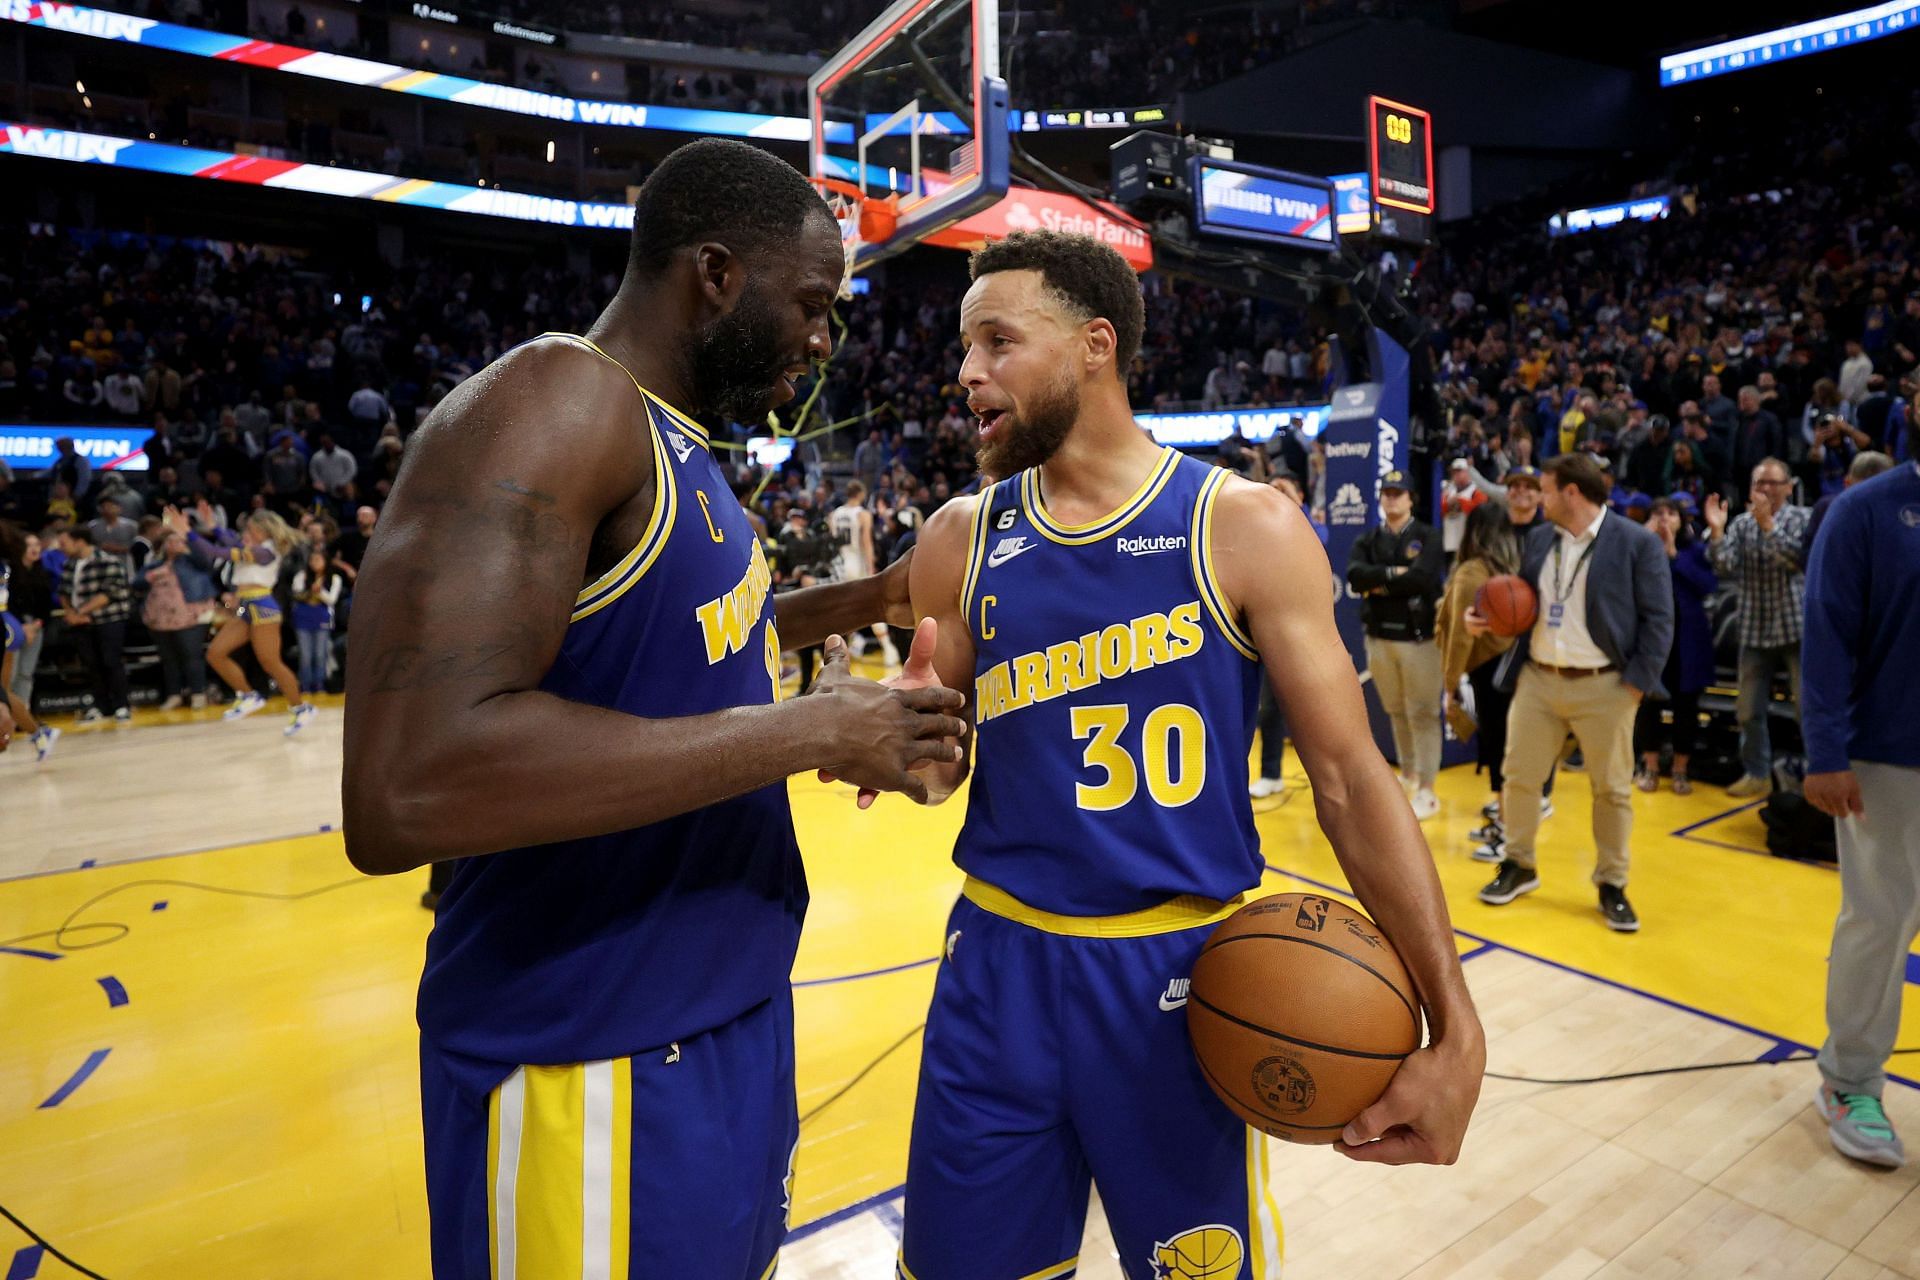 Draymond Green has played a center for the Warriors (Image via Getty Images)